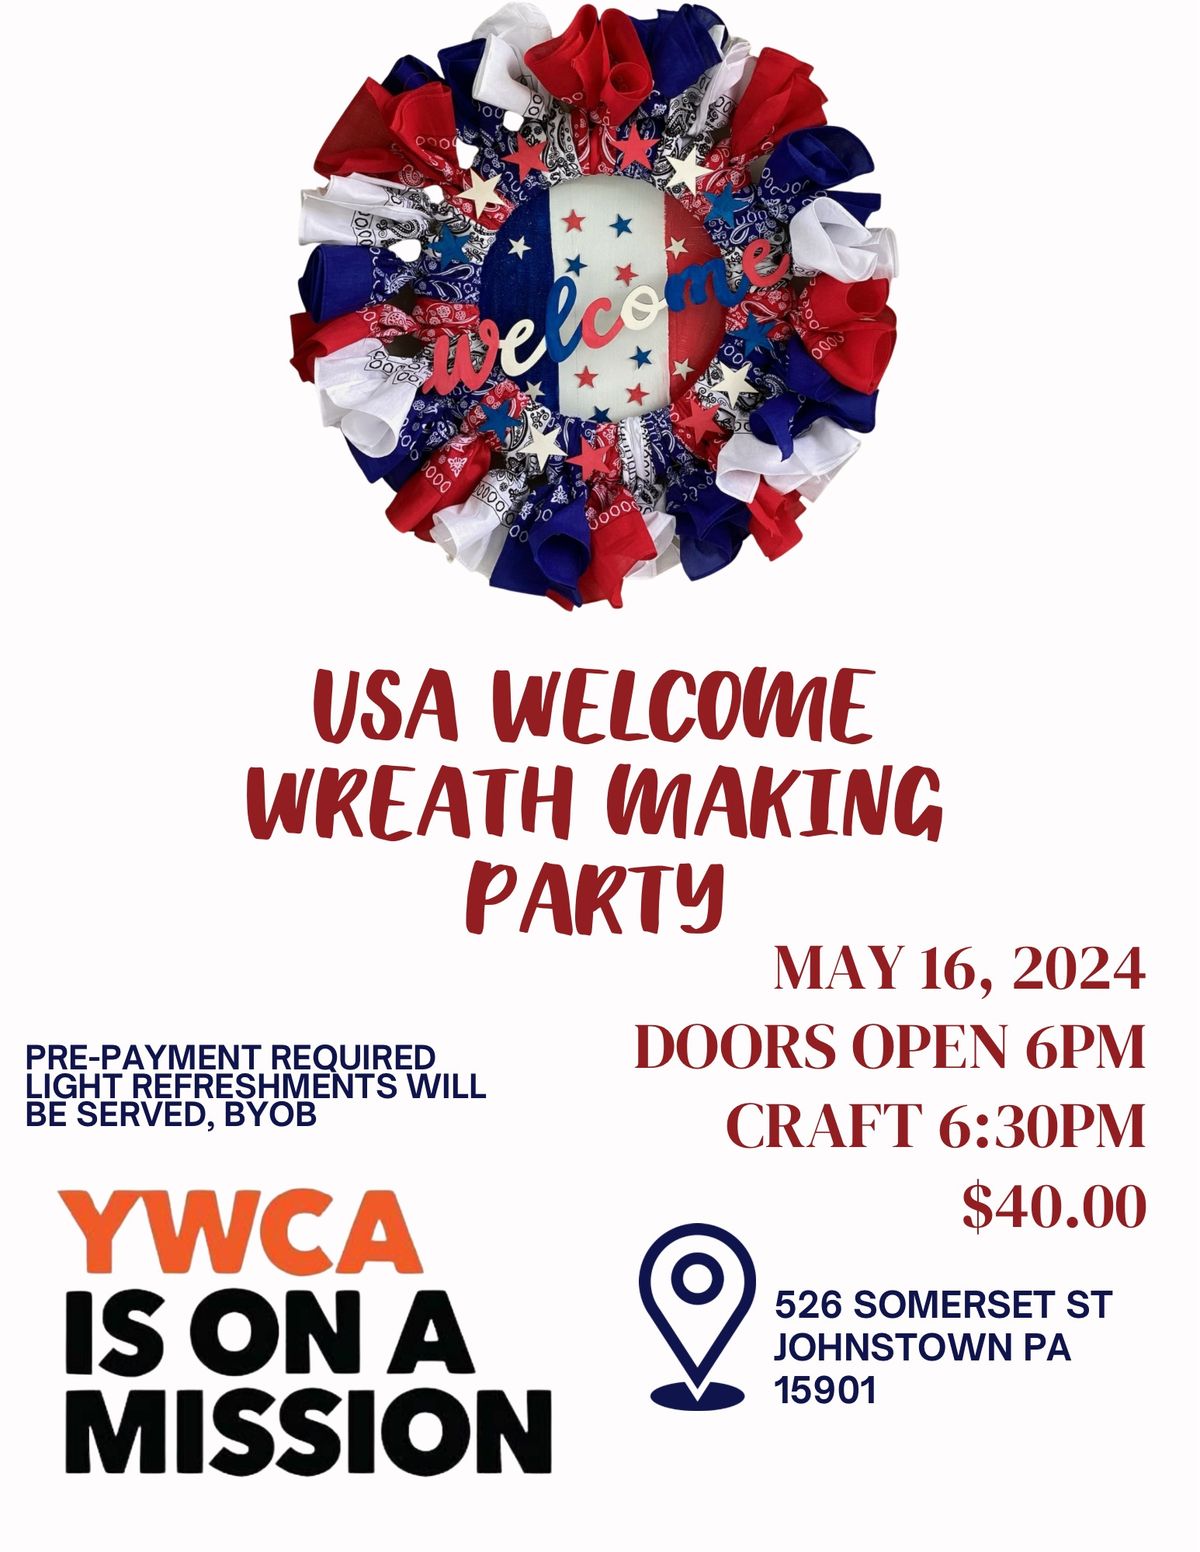 USA WELCOME WREATH MAKING PARTY